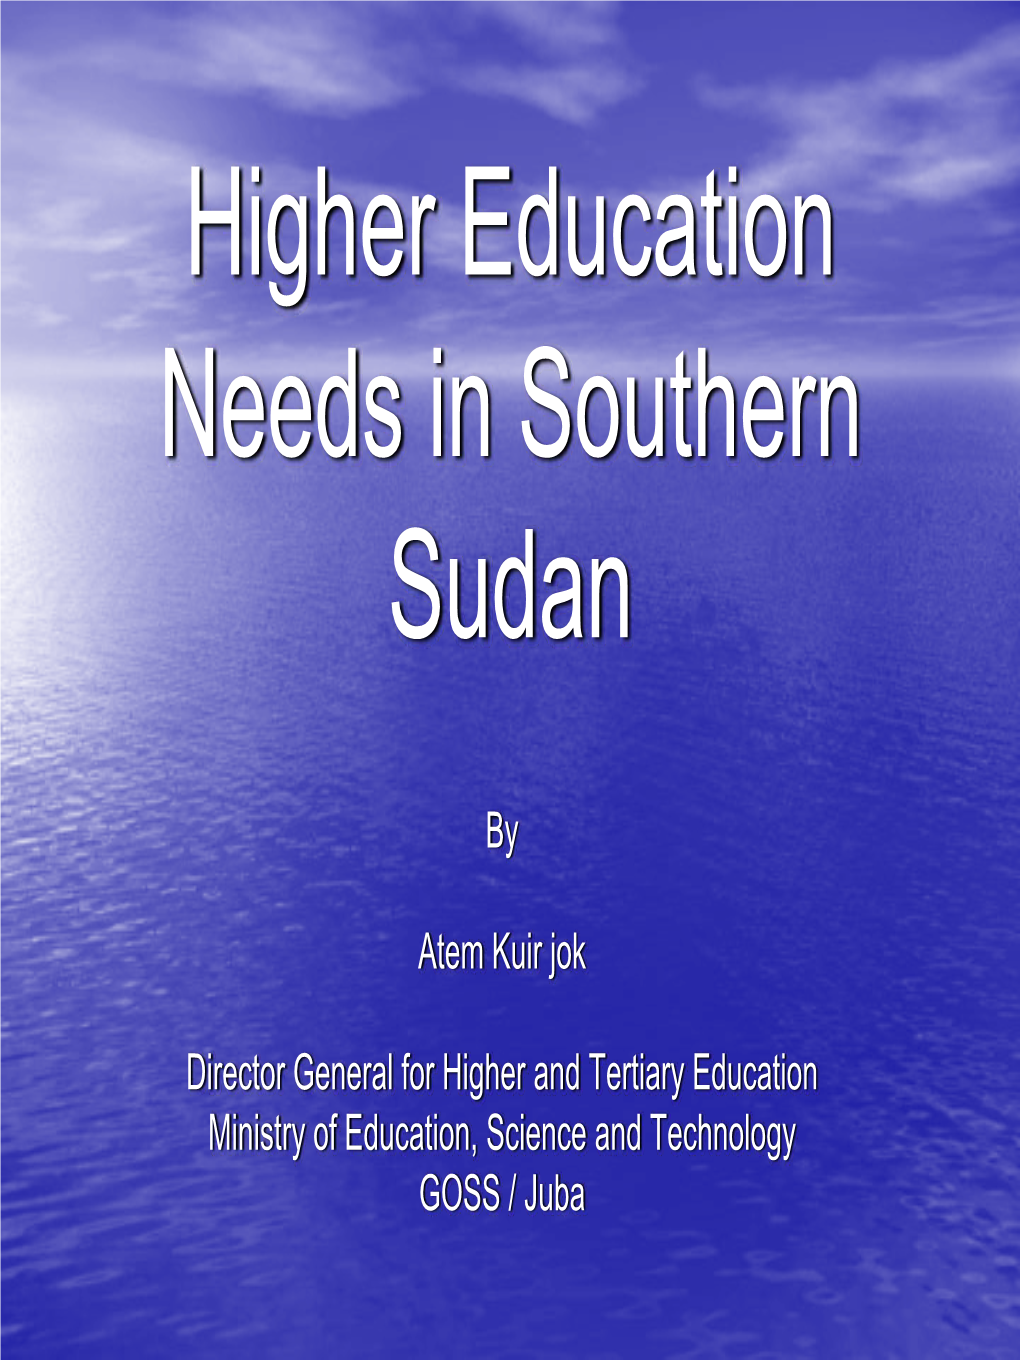 Higher Education Needs in Southern Sudan